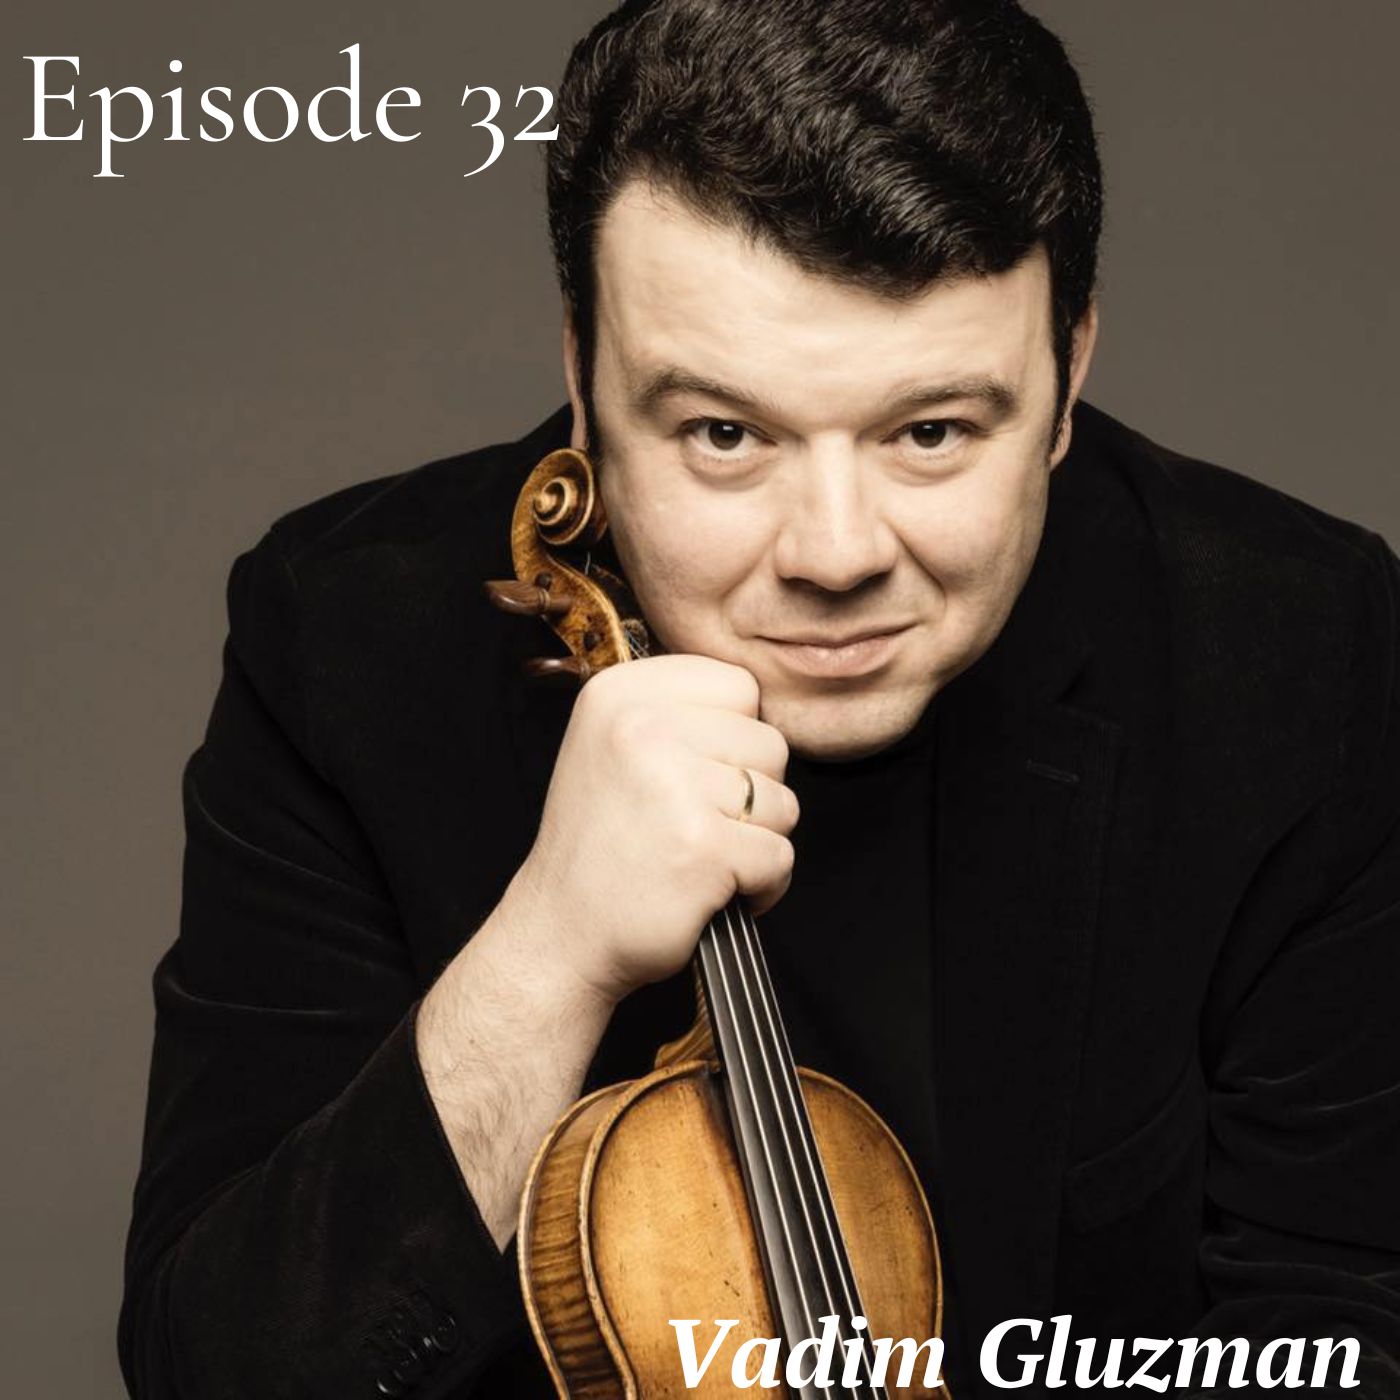 Episode 32: Vadim Gluzman - Should you choose music as your career? How to avoid routine? - part 2